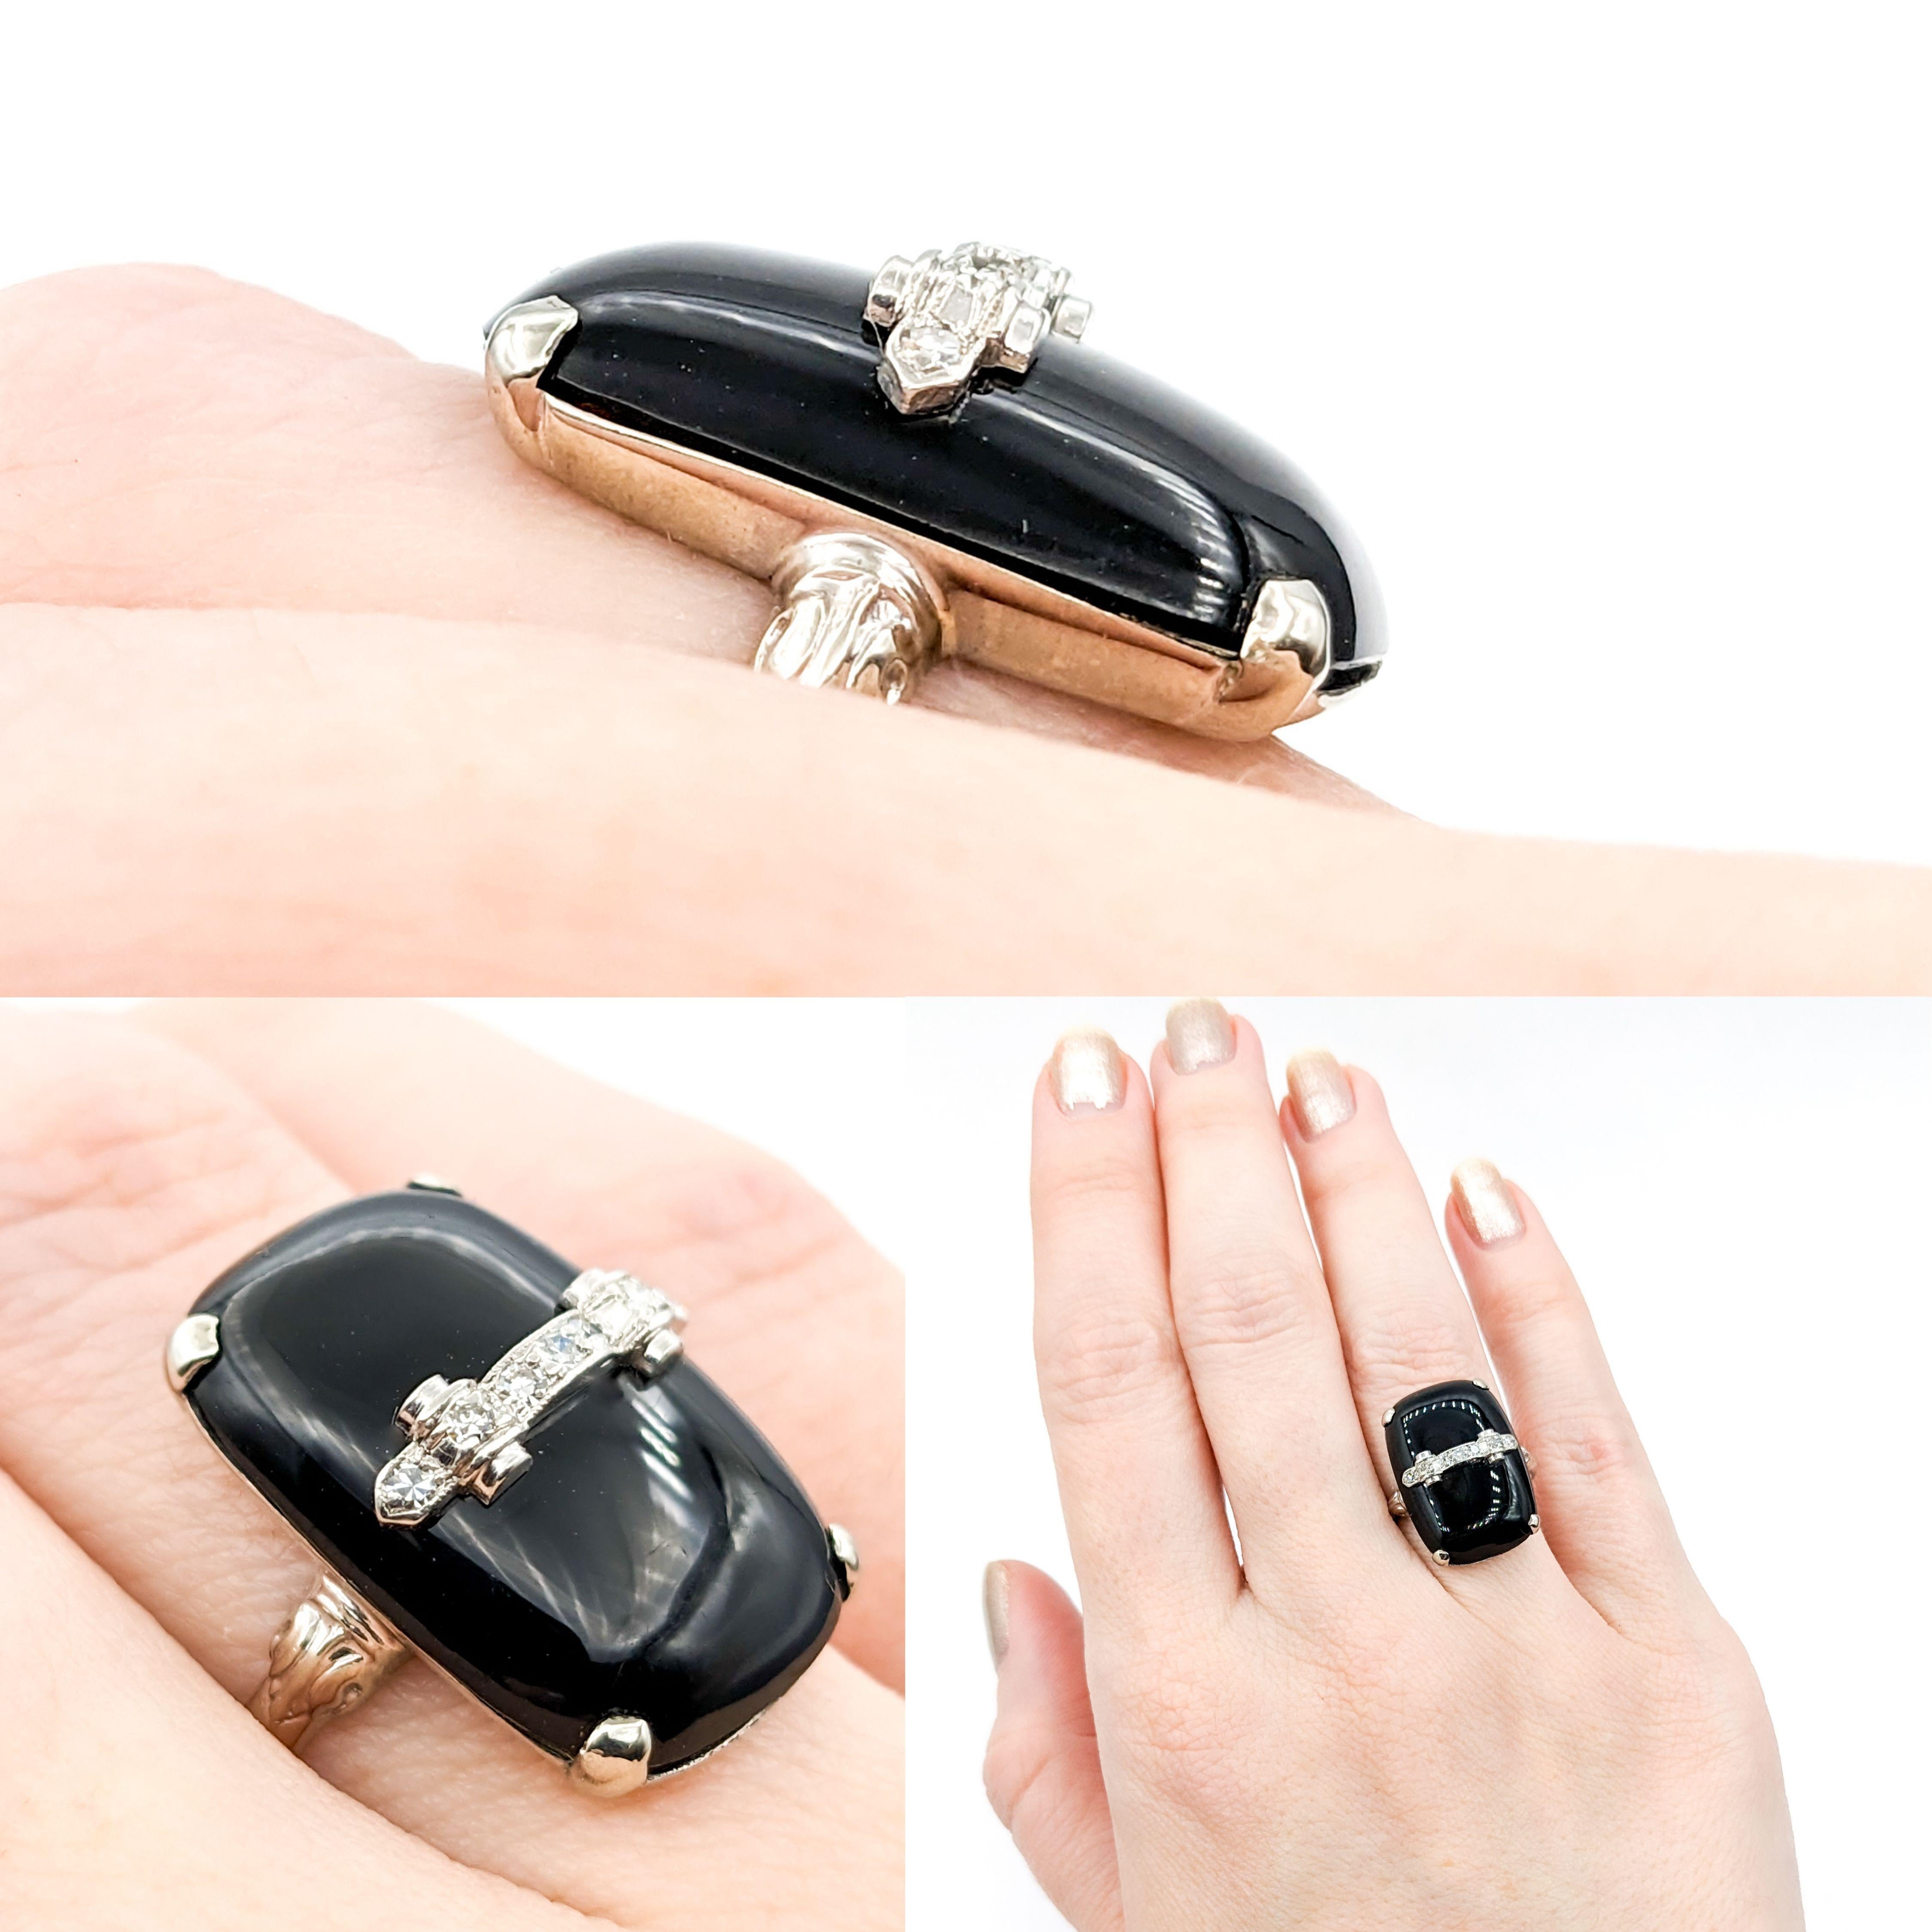 Unique Cabochon Black Onyx & Diamond Cocktail Ring

Step into the world of classic elegance with this vintage ring, exquisitely fashioned in 14k white gold. It spotlights .10ctw of single cut diamonds that radiate with SI clarity and a